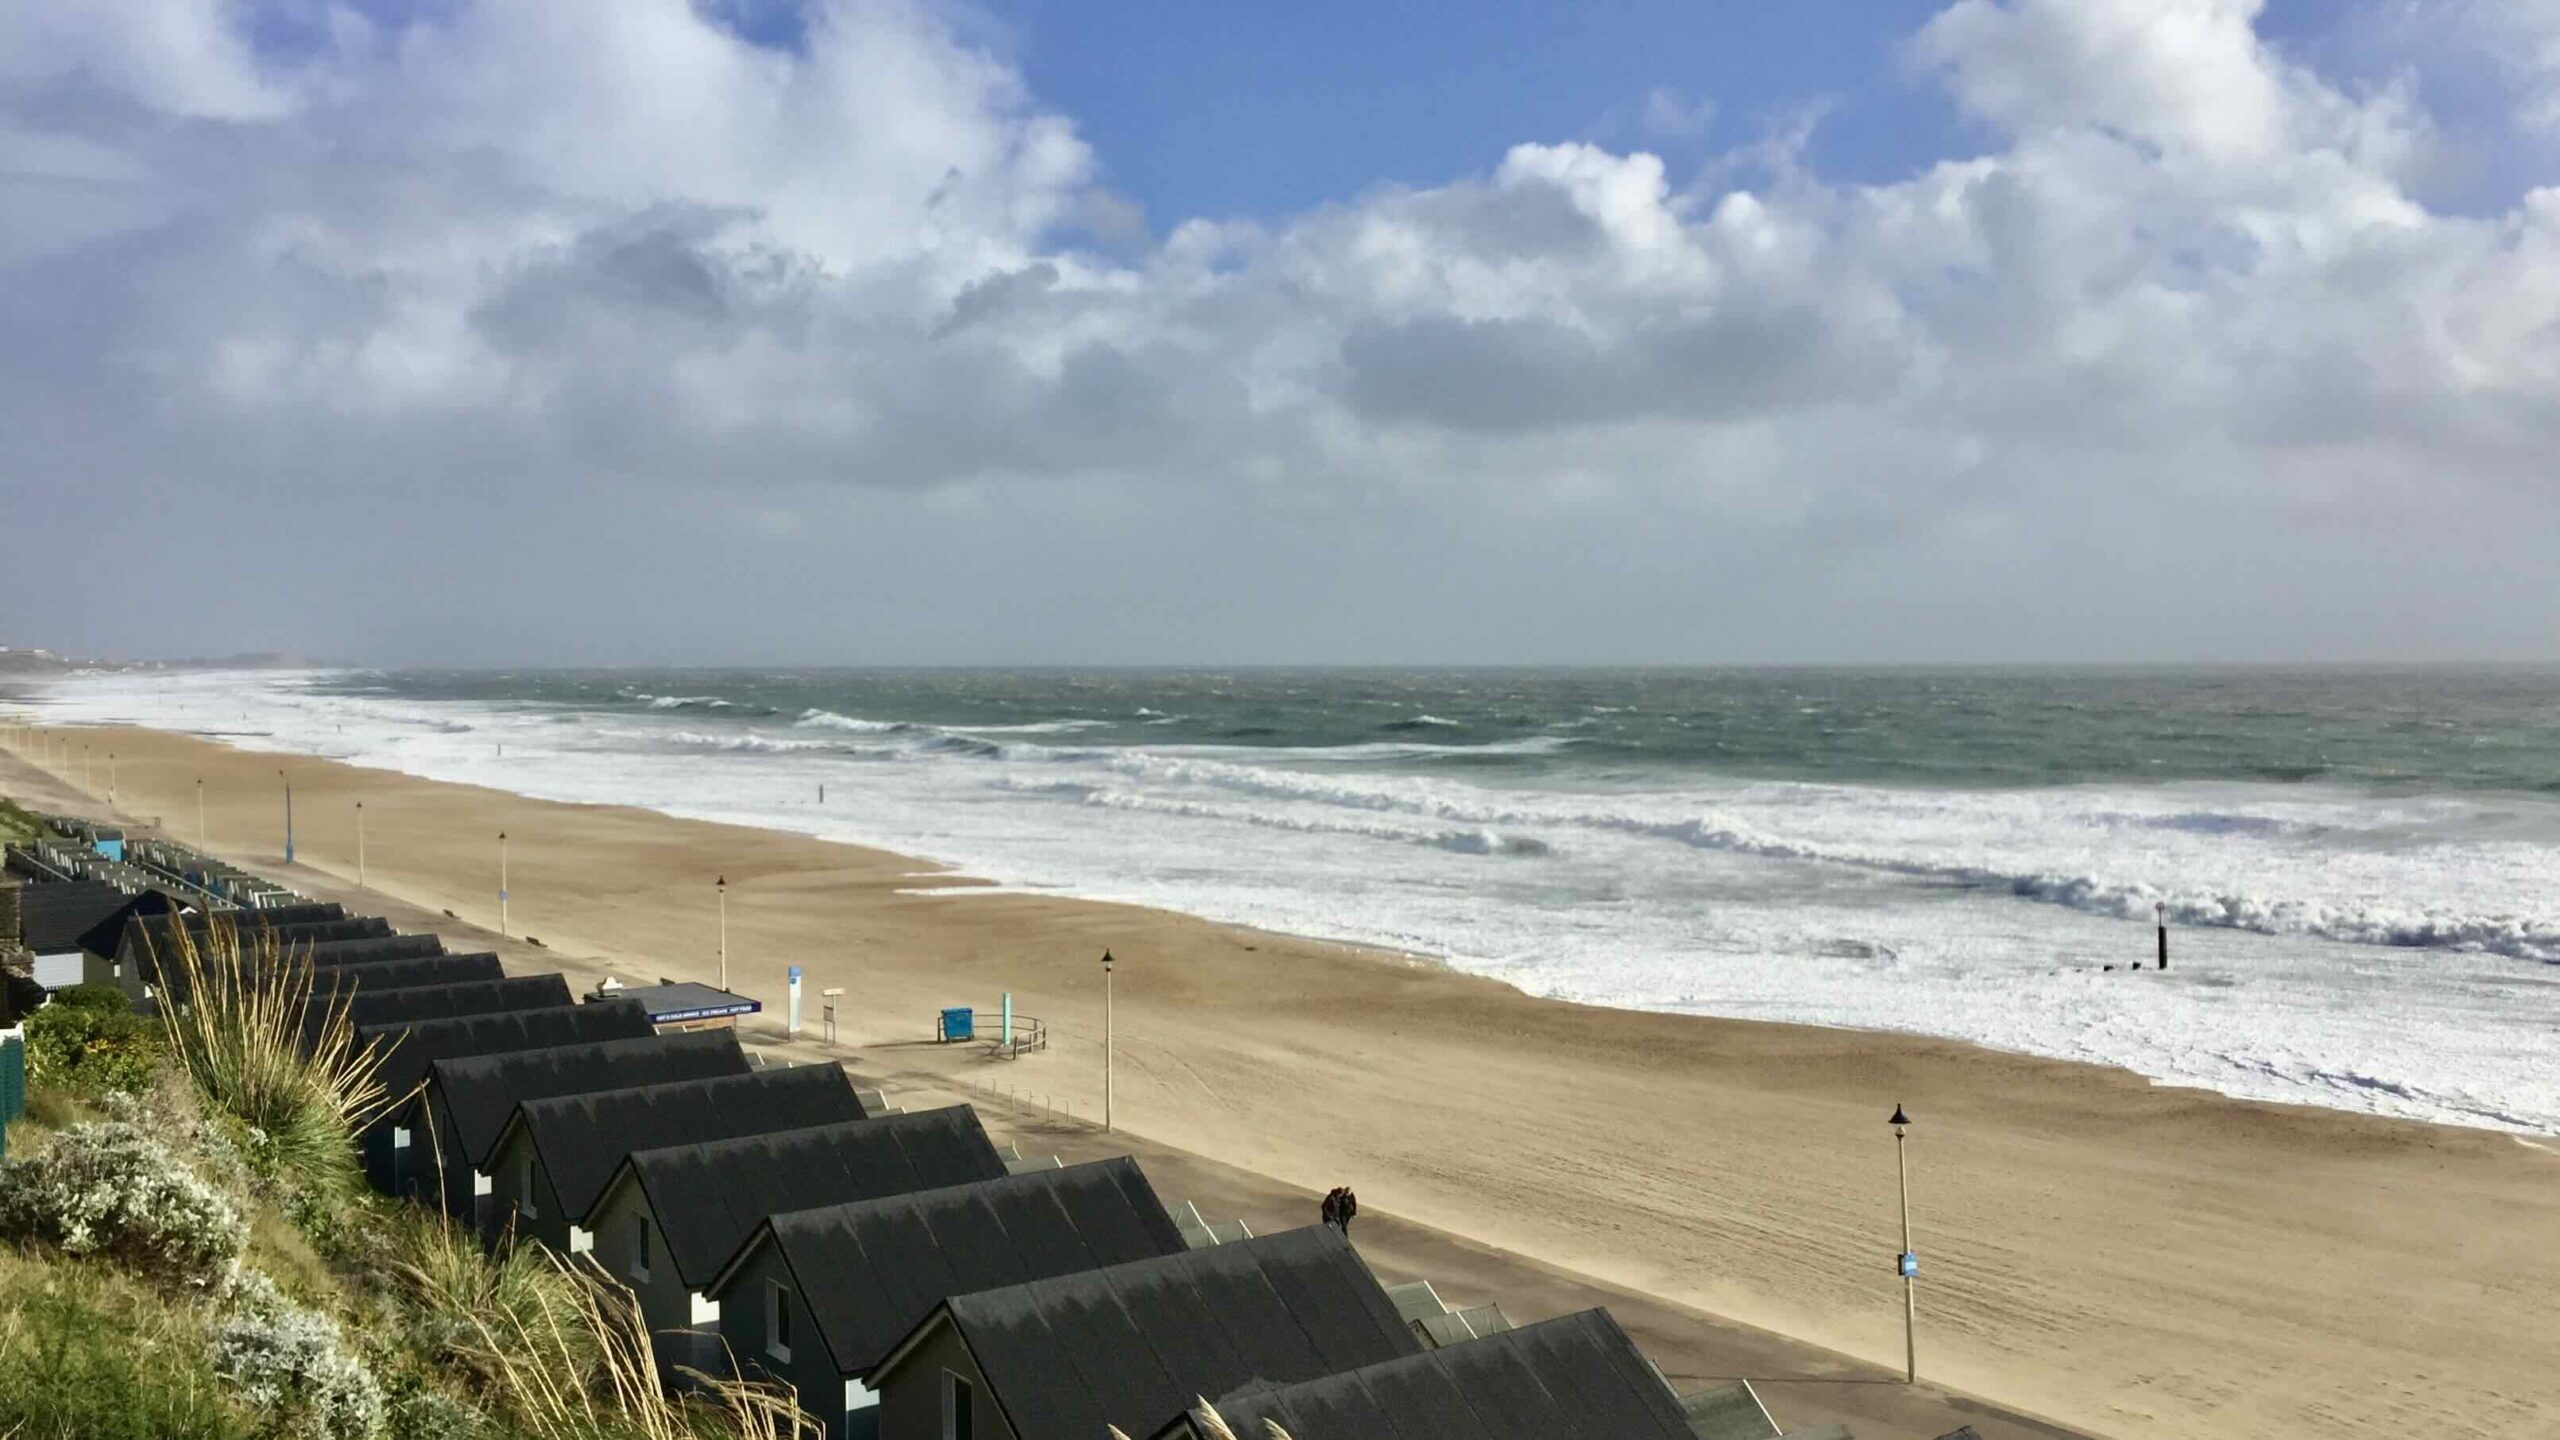 A stay in Bournemouth gives you access to endless miles of stunning coastal paths fun things to do on Bournemouth beachfront